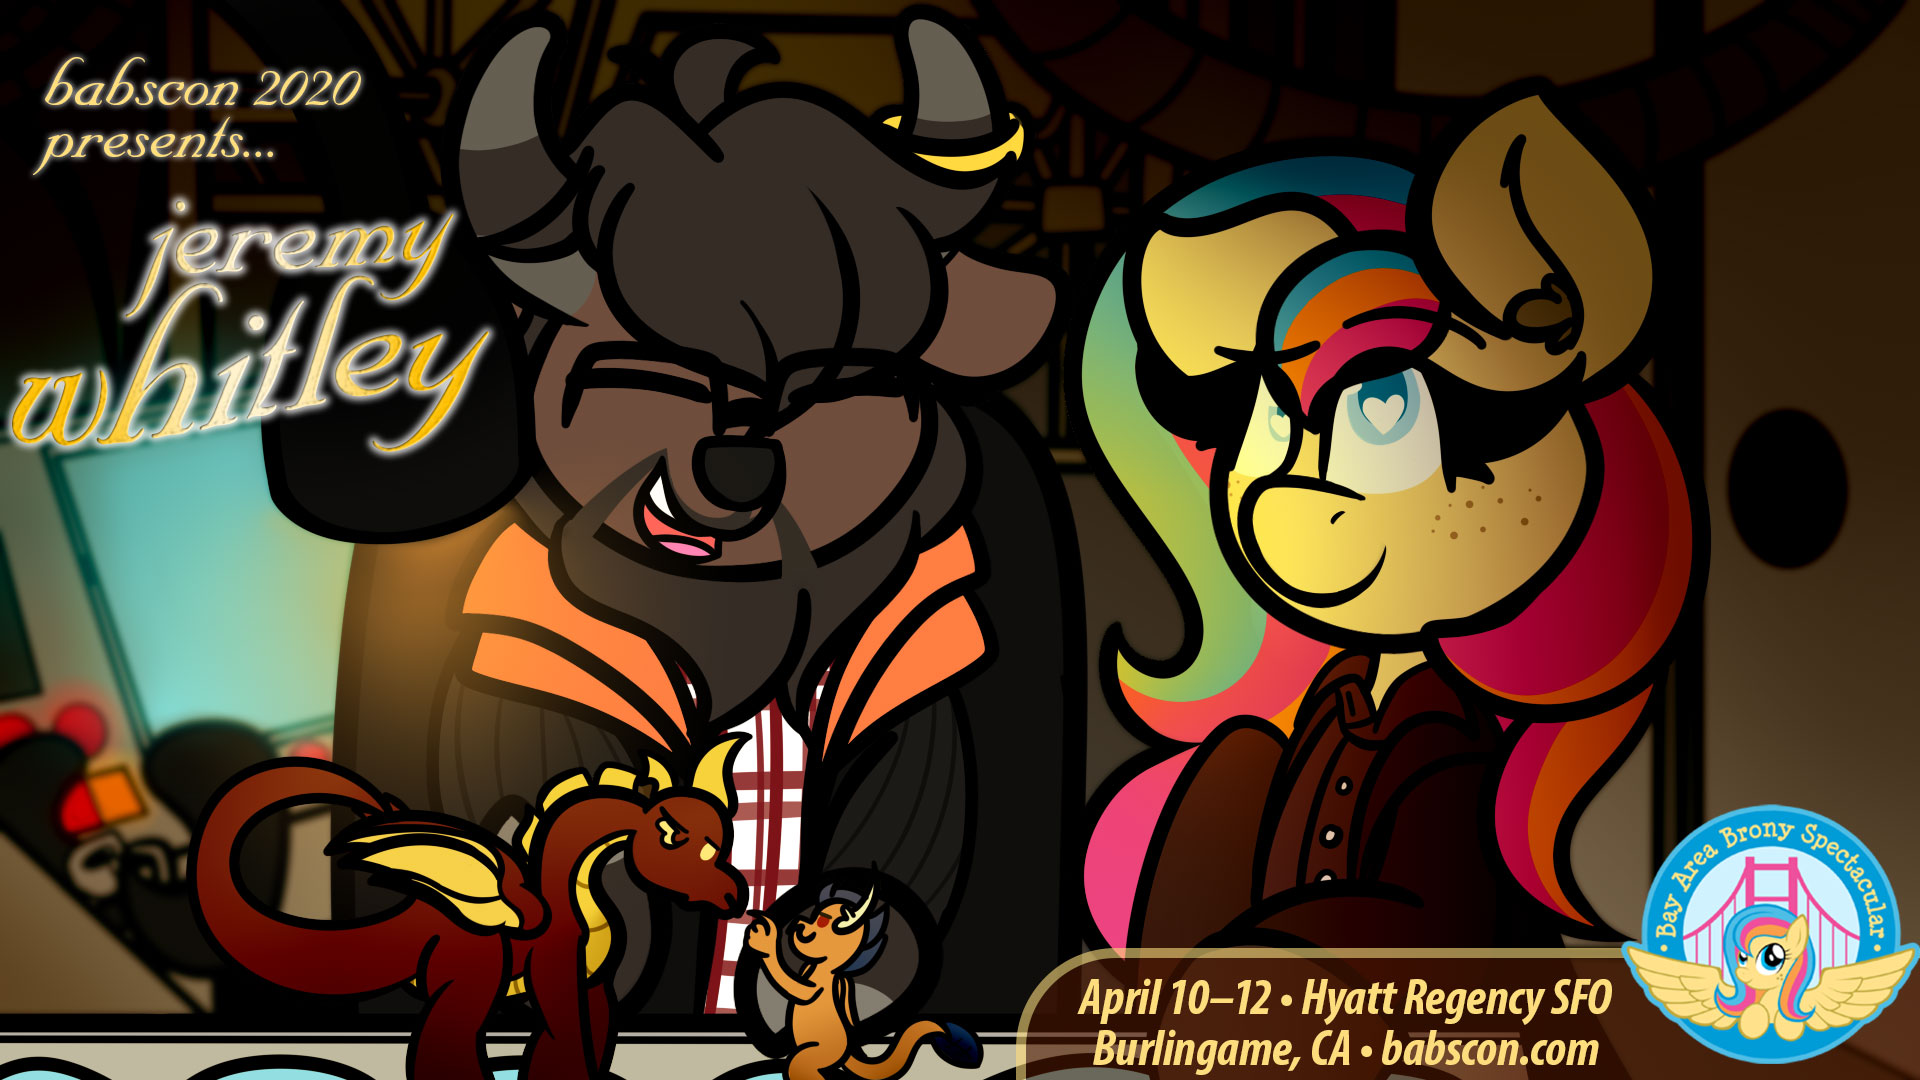 BABSCon 2020 Aims to Misbehave with Jeremy Whitley